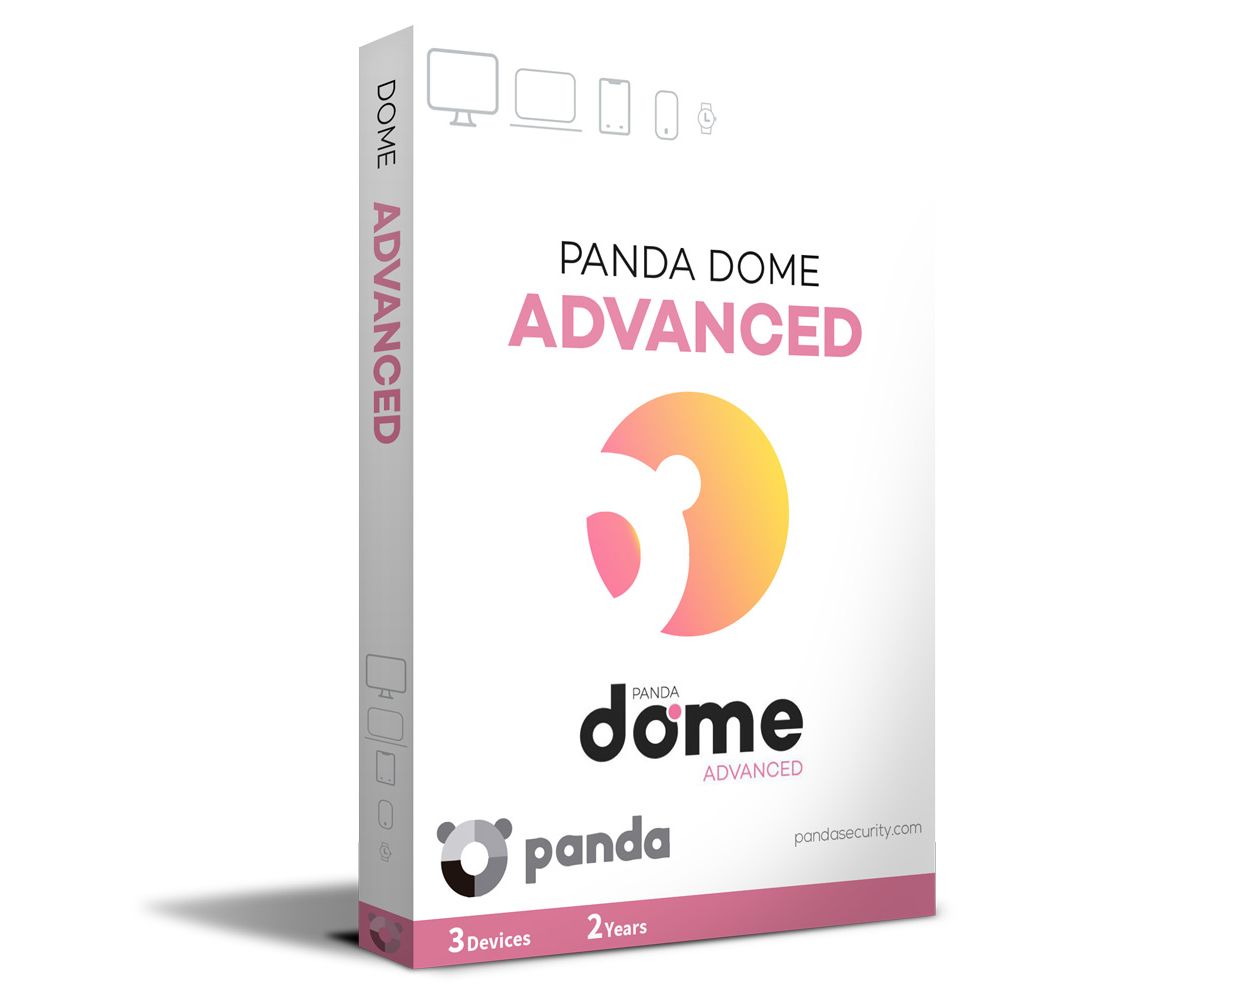 panda dome download for windows 10